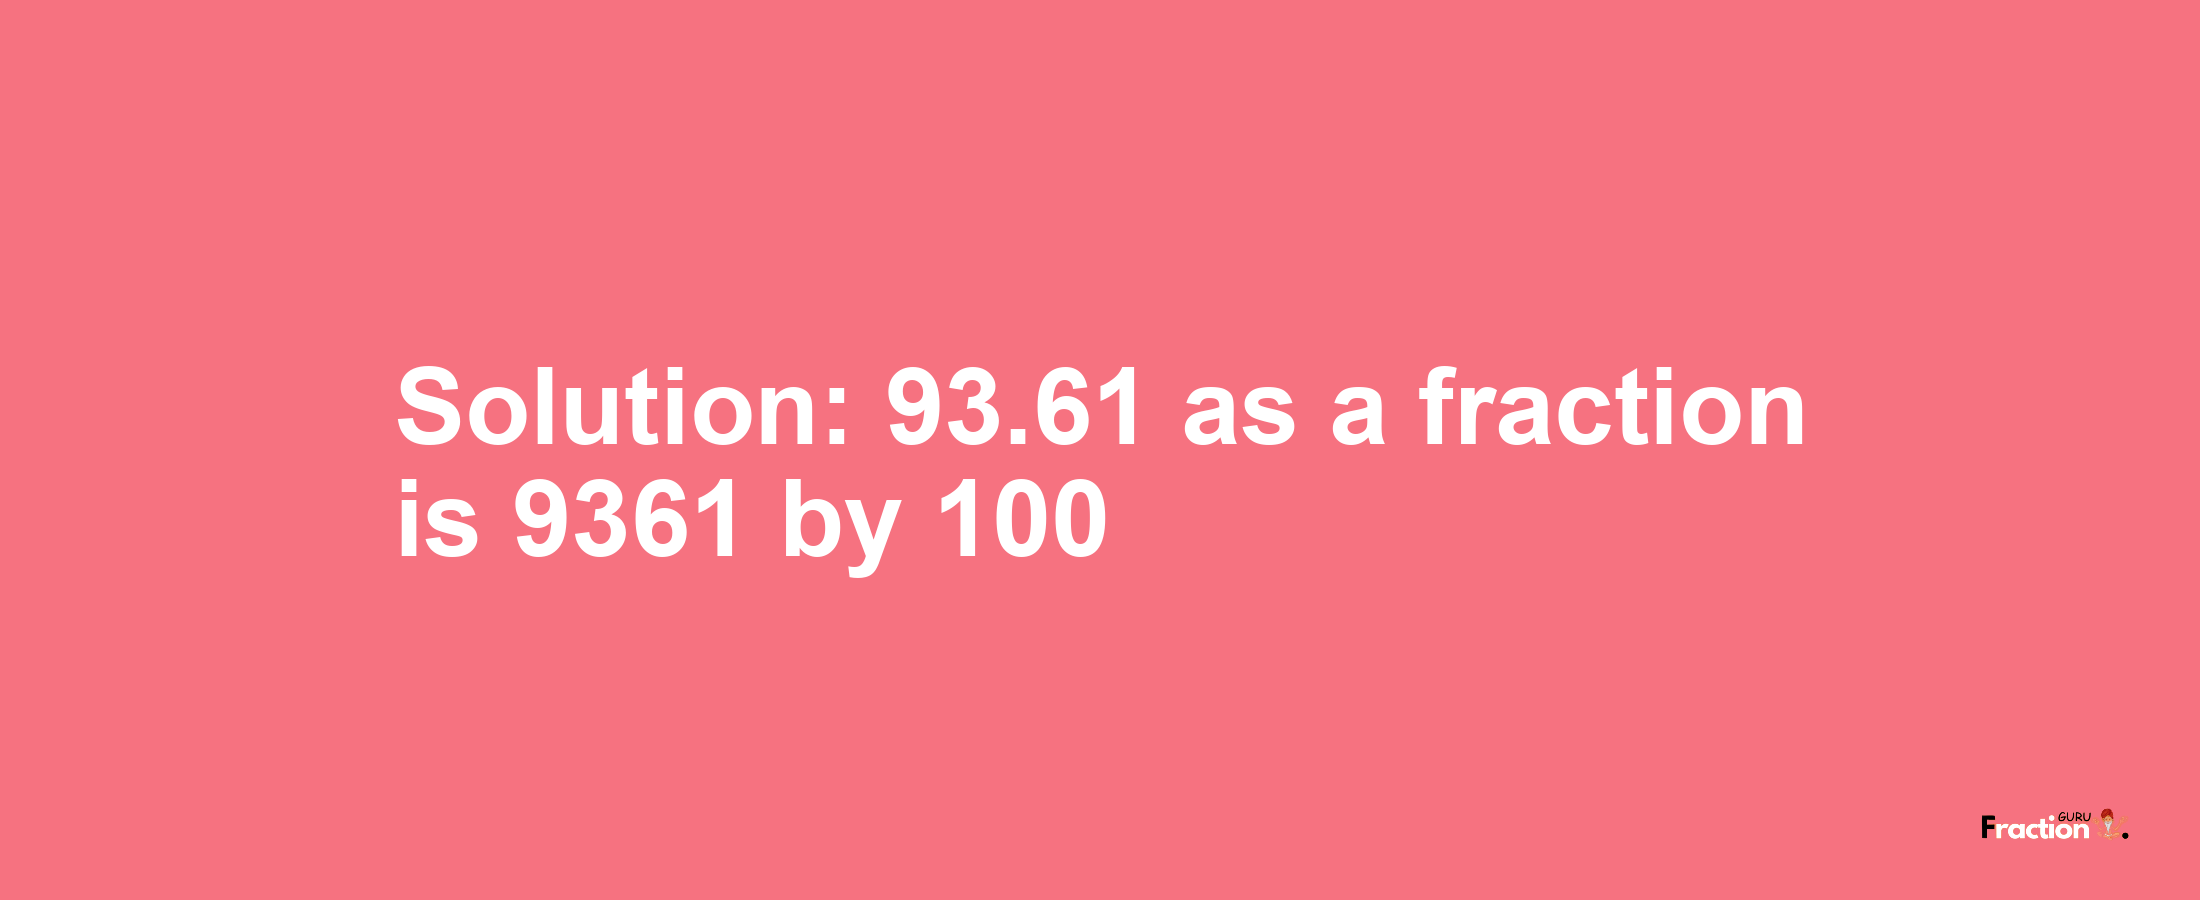 Solution:93.61 as a fraction is 9361/100